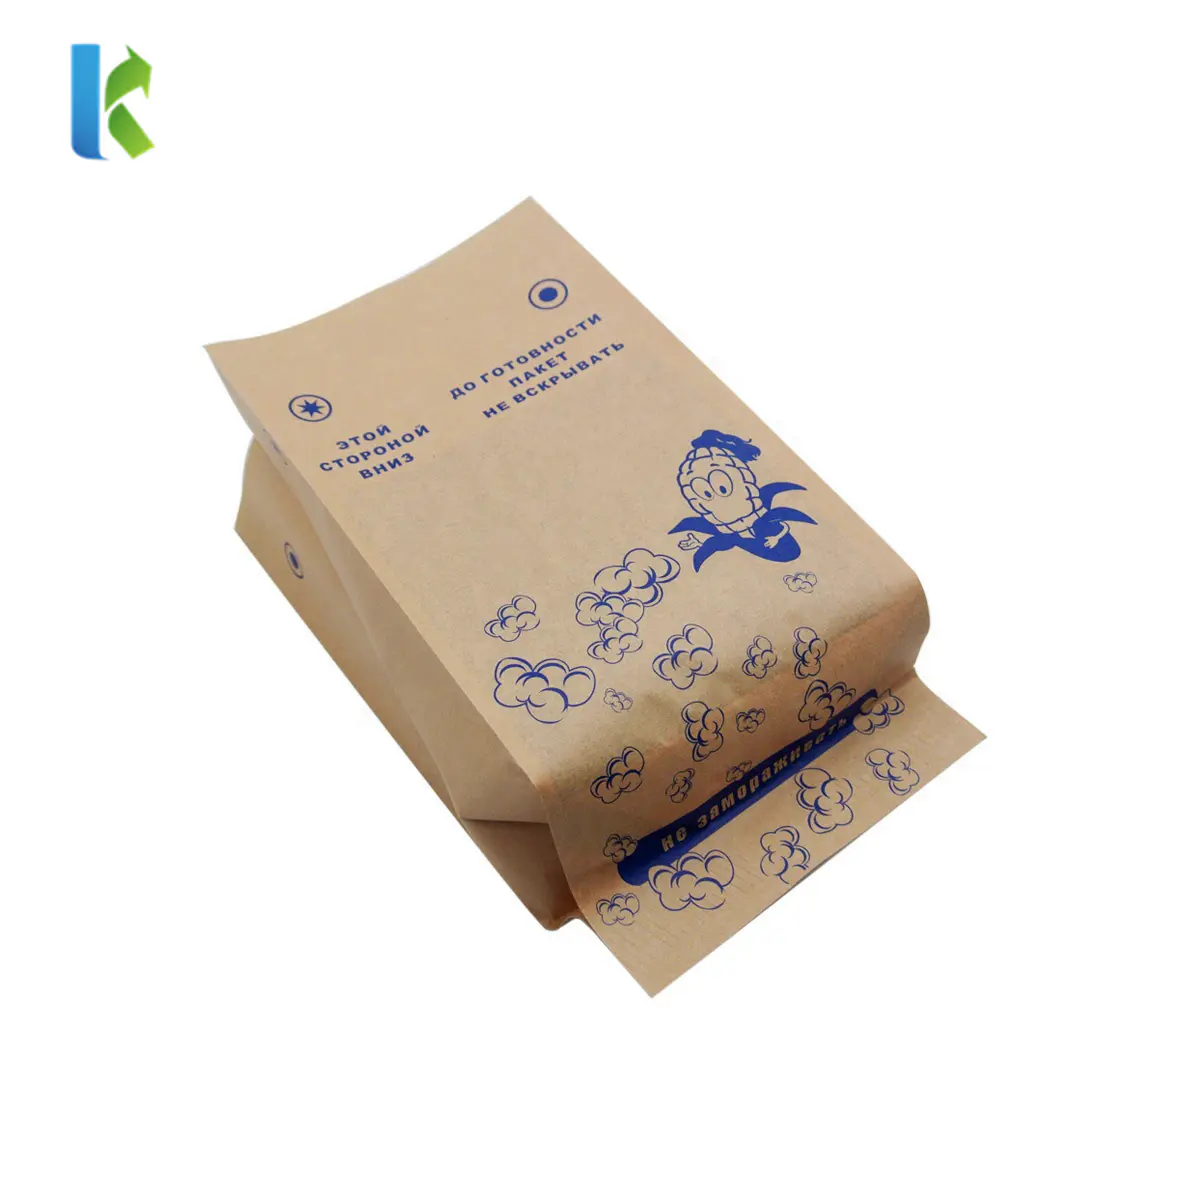 New Greaseproof Corn Logo Large Sealable Factory BolsoMicroondasWholesale Packaging For Popcorn